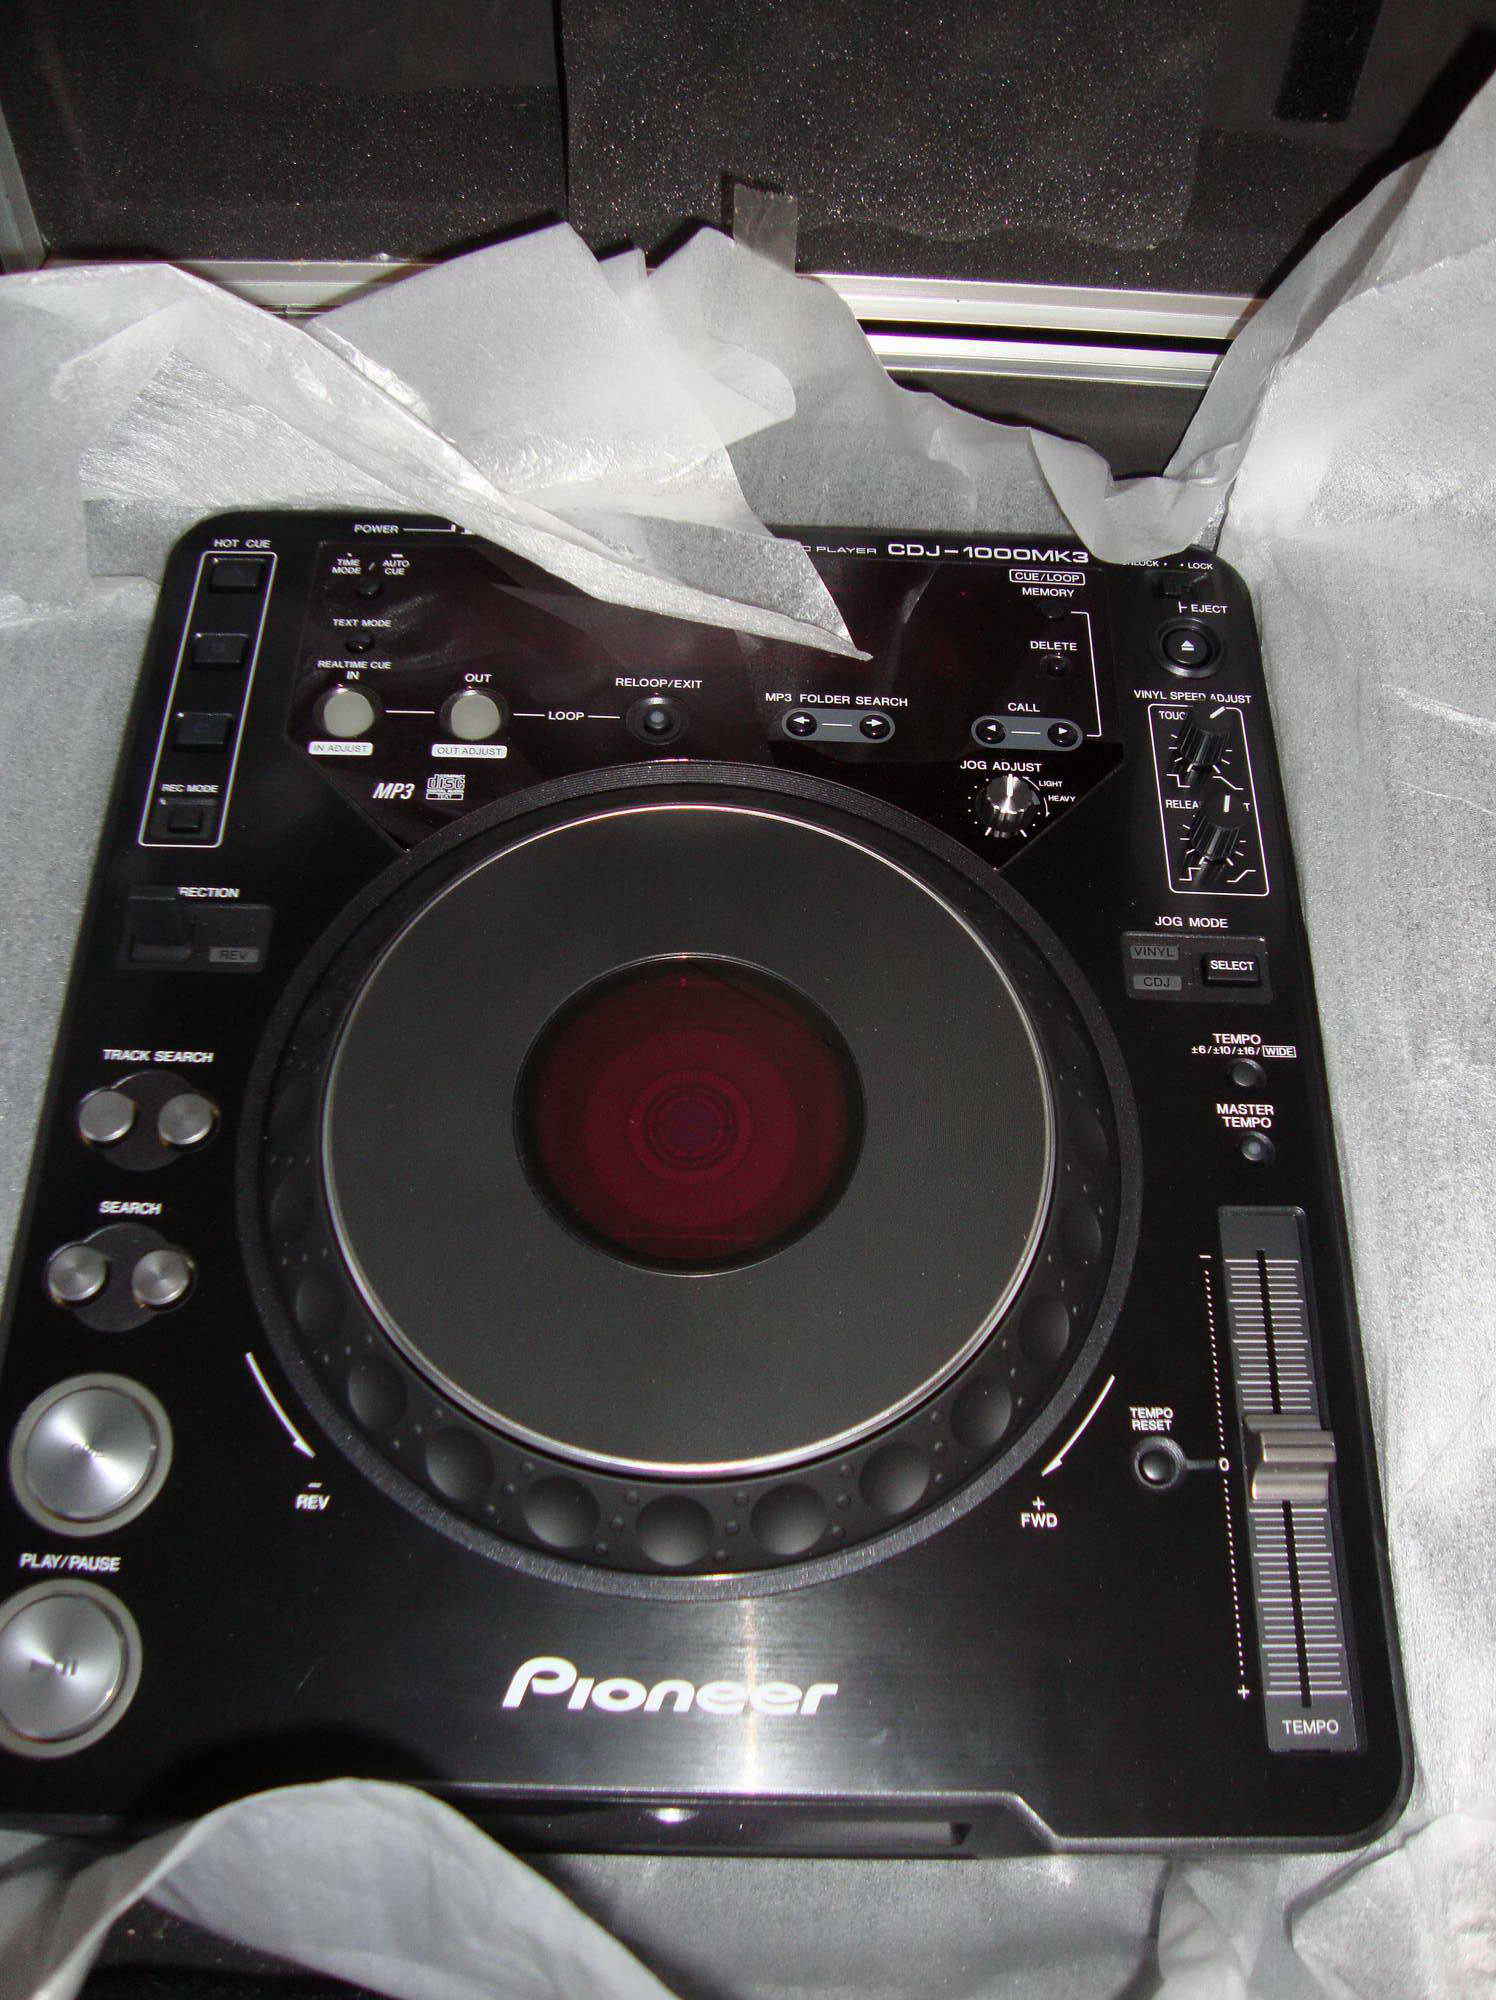 DJ PLAYER Package contact 0174-869-4804  large image 0